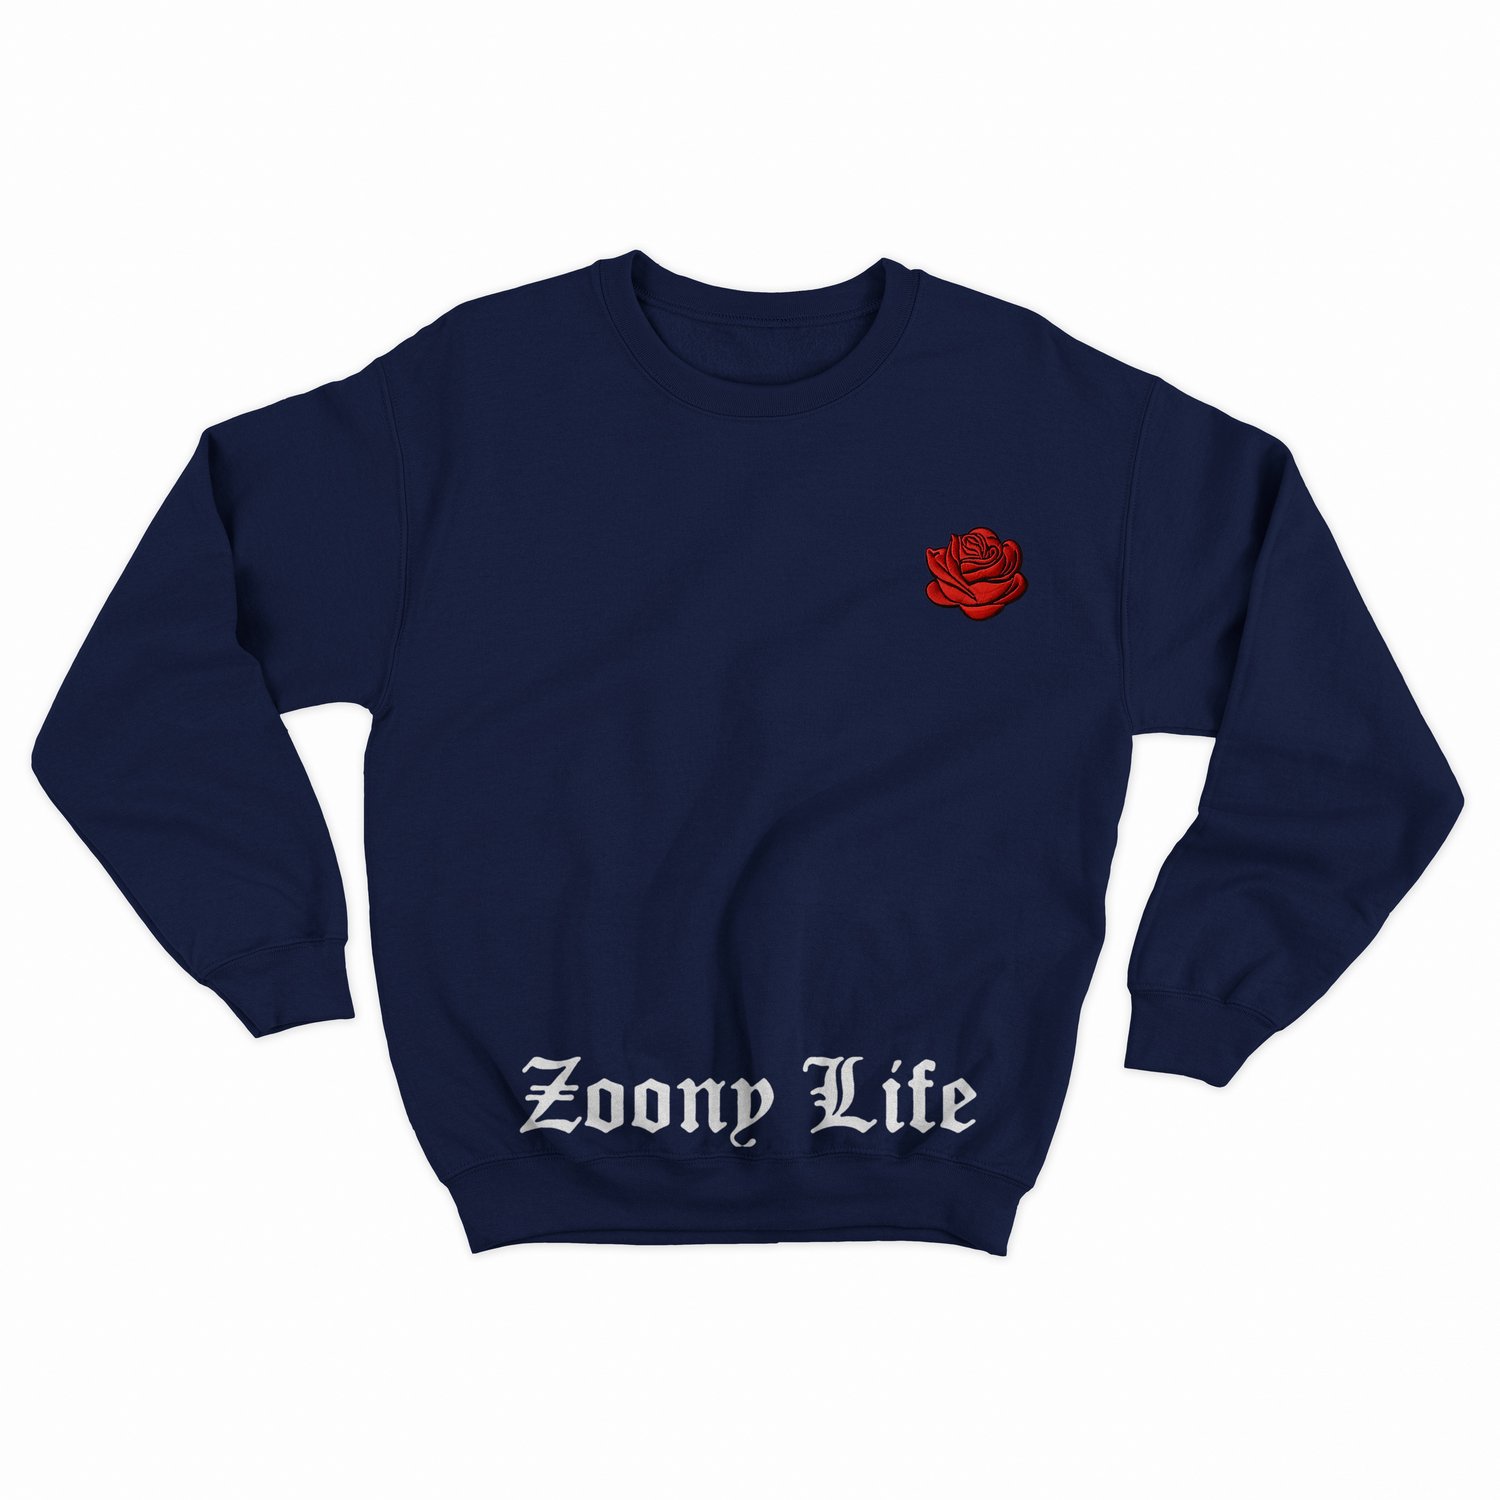 Image of Concrete rose Sweatshirts (Click for Colors)